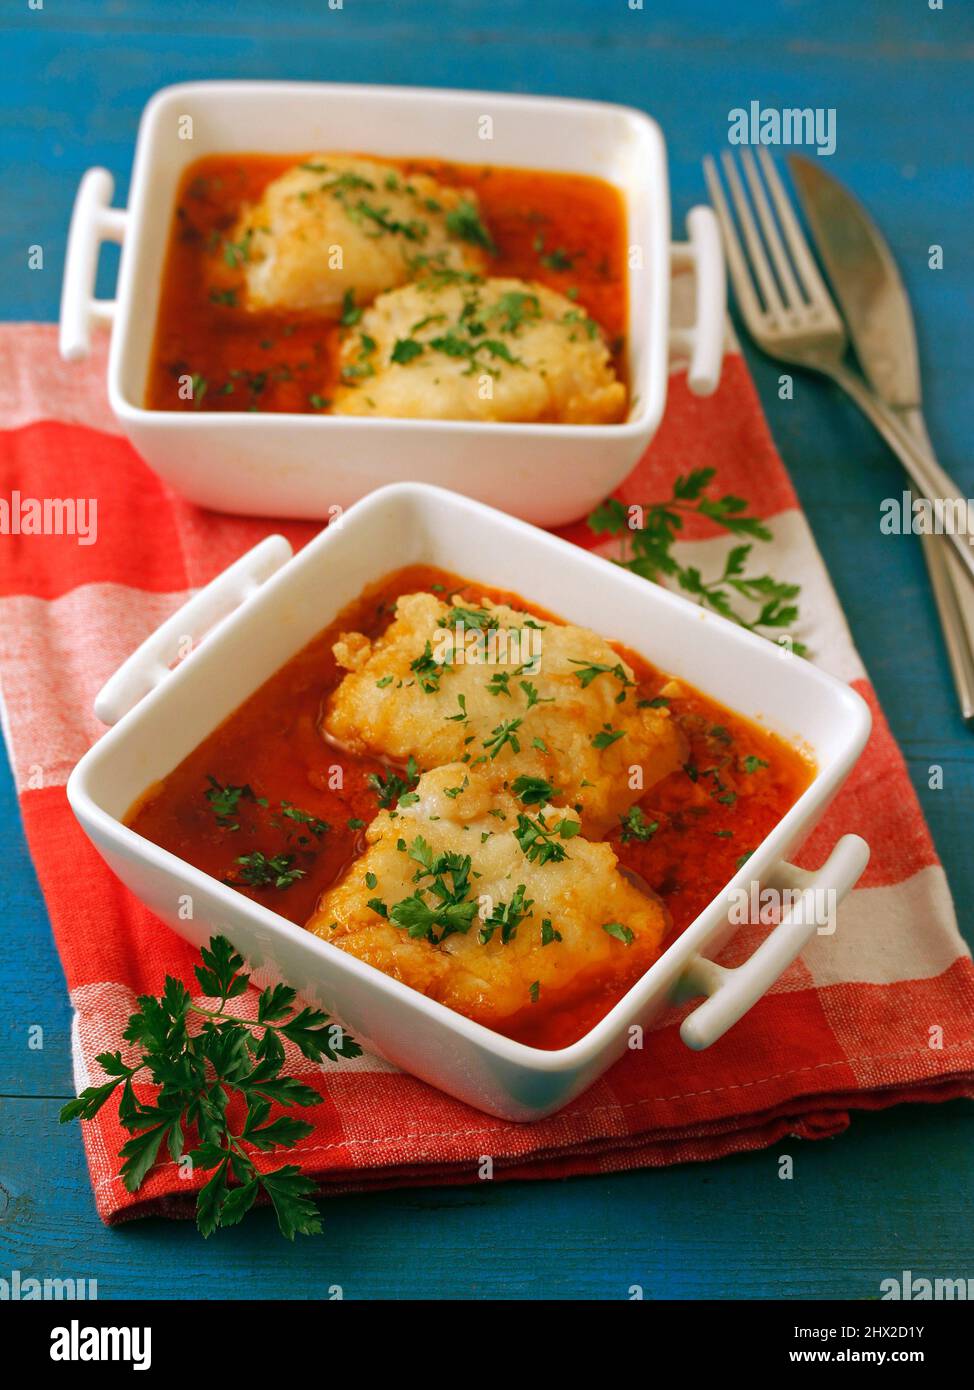 Cod fish with tomato sauce and parsley. Stock Photo